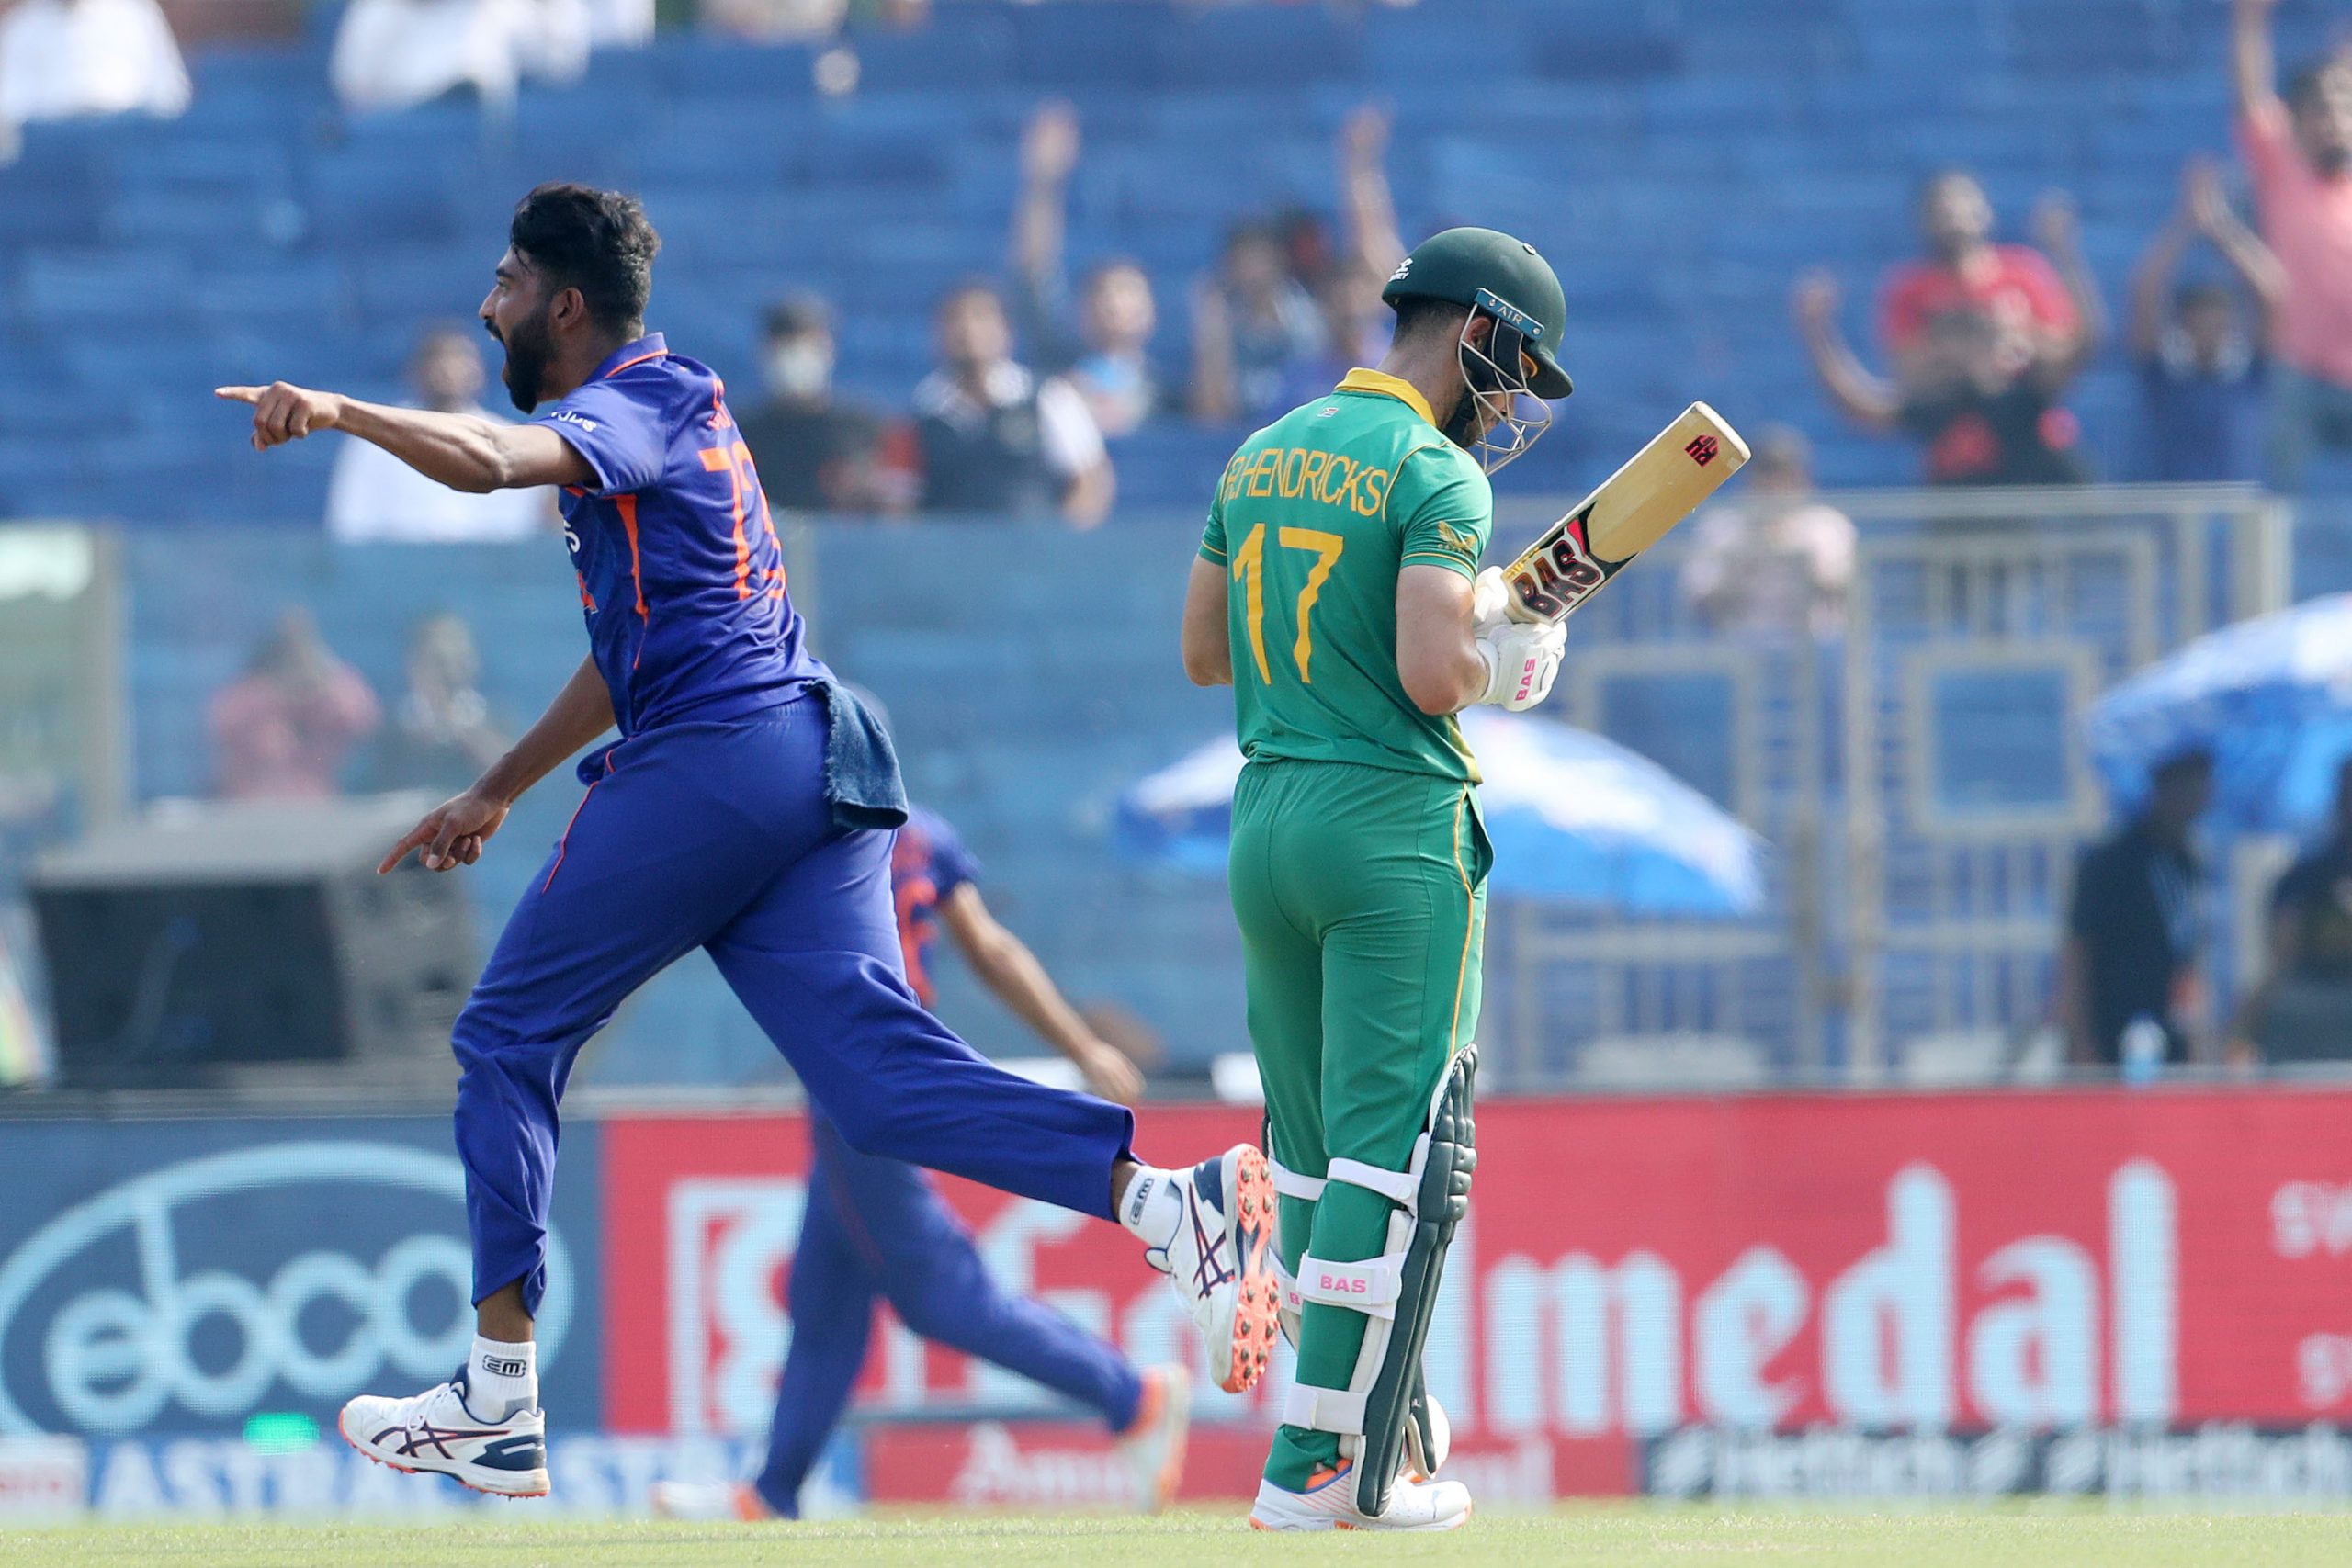 India beat South Africa by 7 wickets in 3rd ODI, win series 2-1